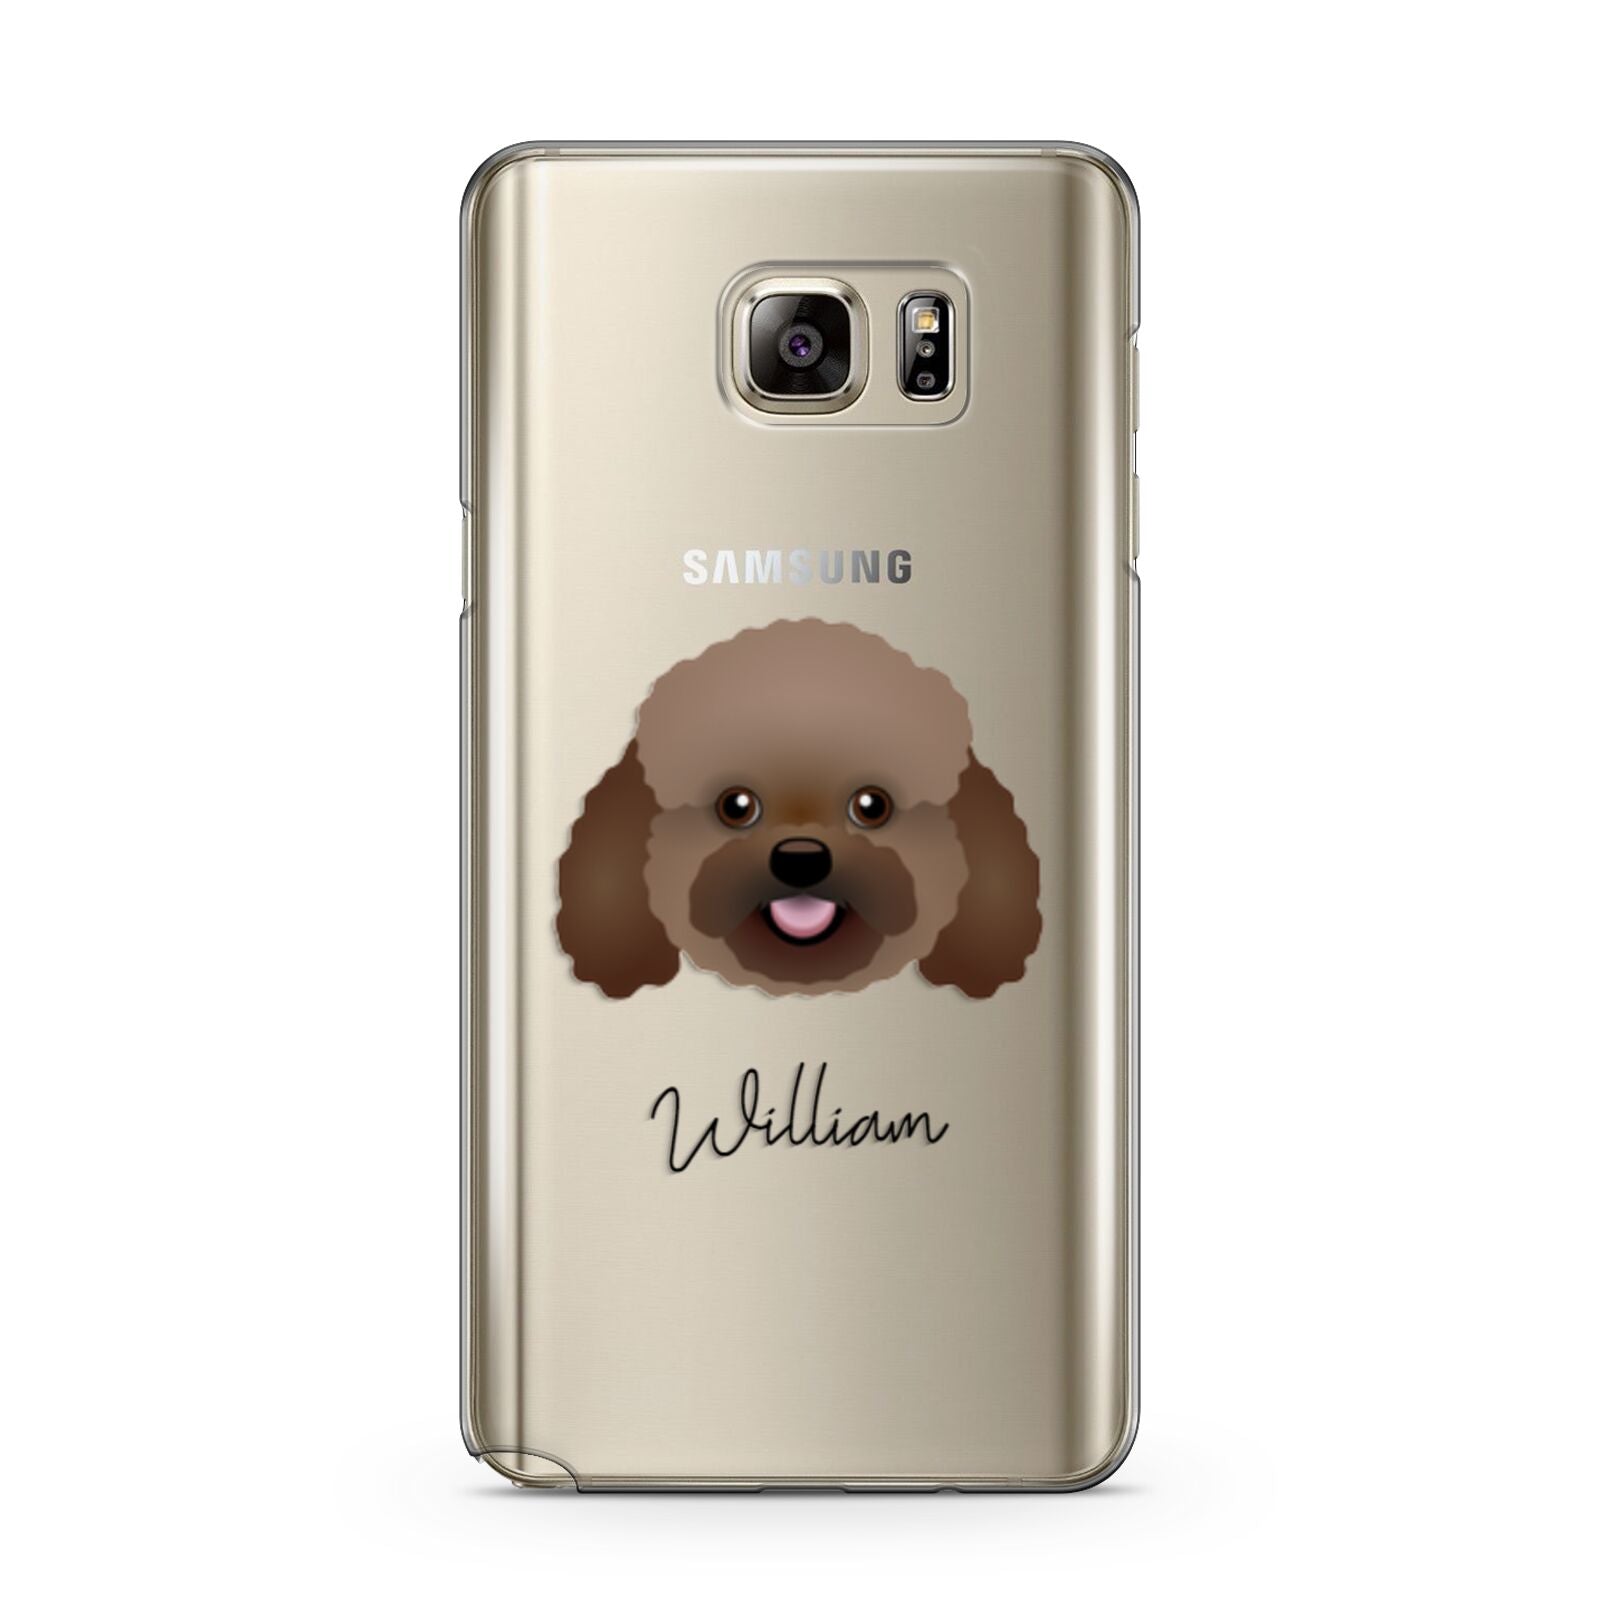 Bich poo Personalised Samsung Galaxy Note 5 Case